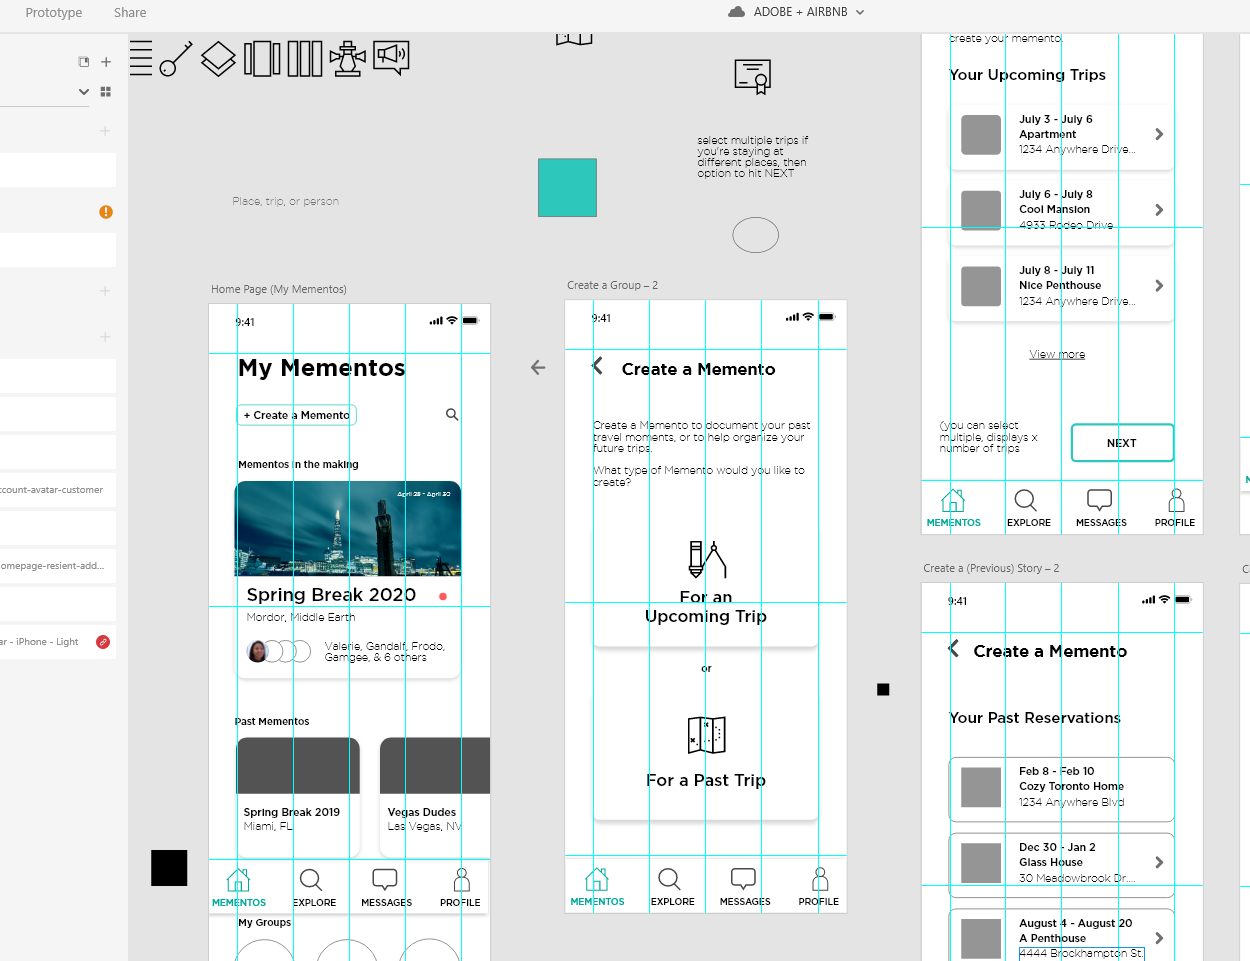 Using the grid in our wireframe